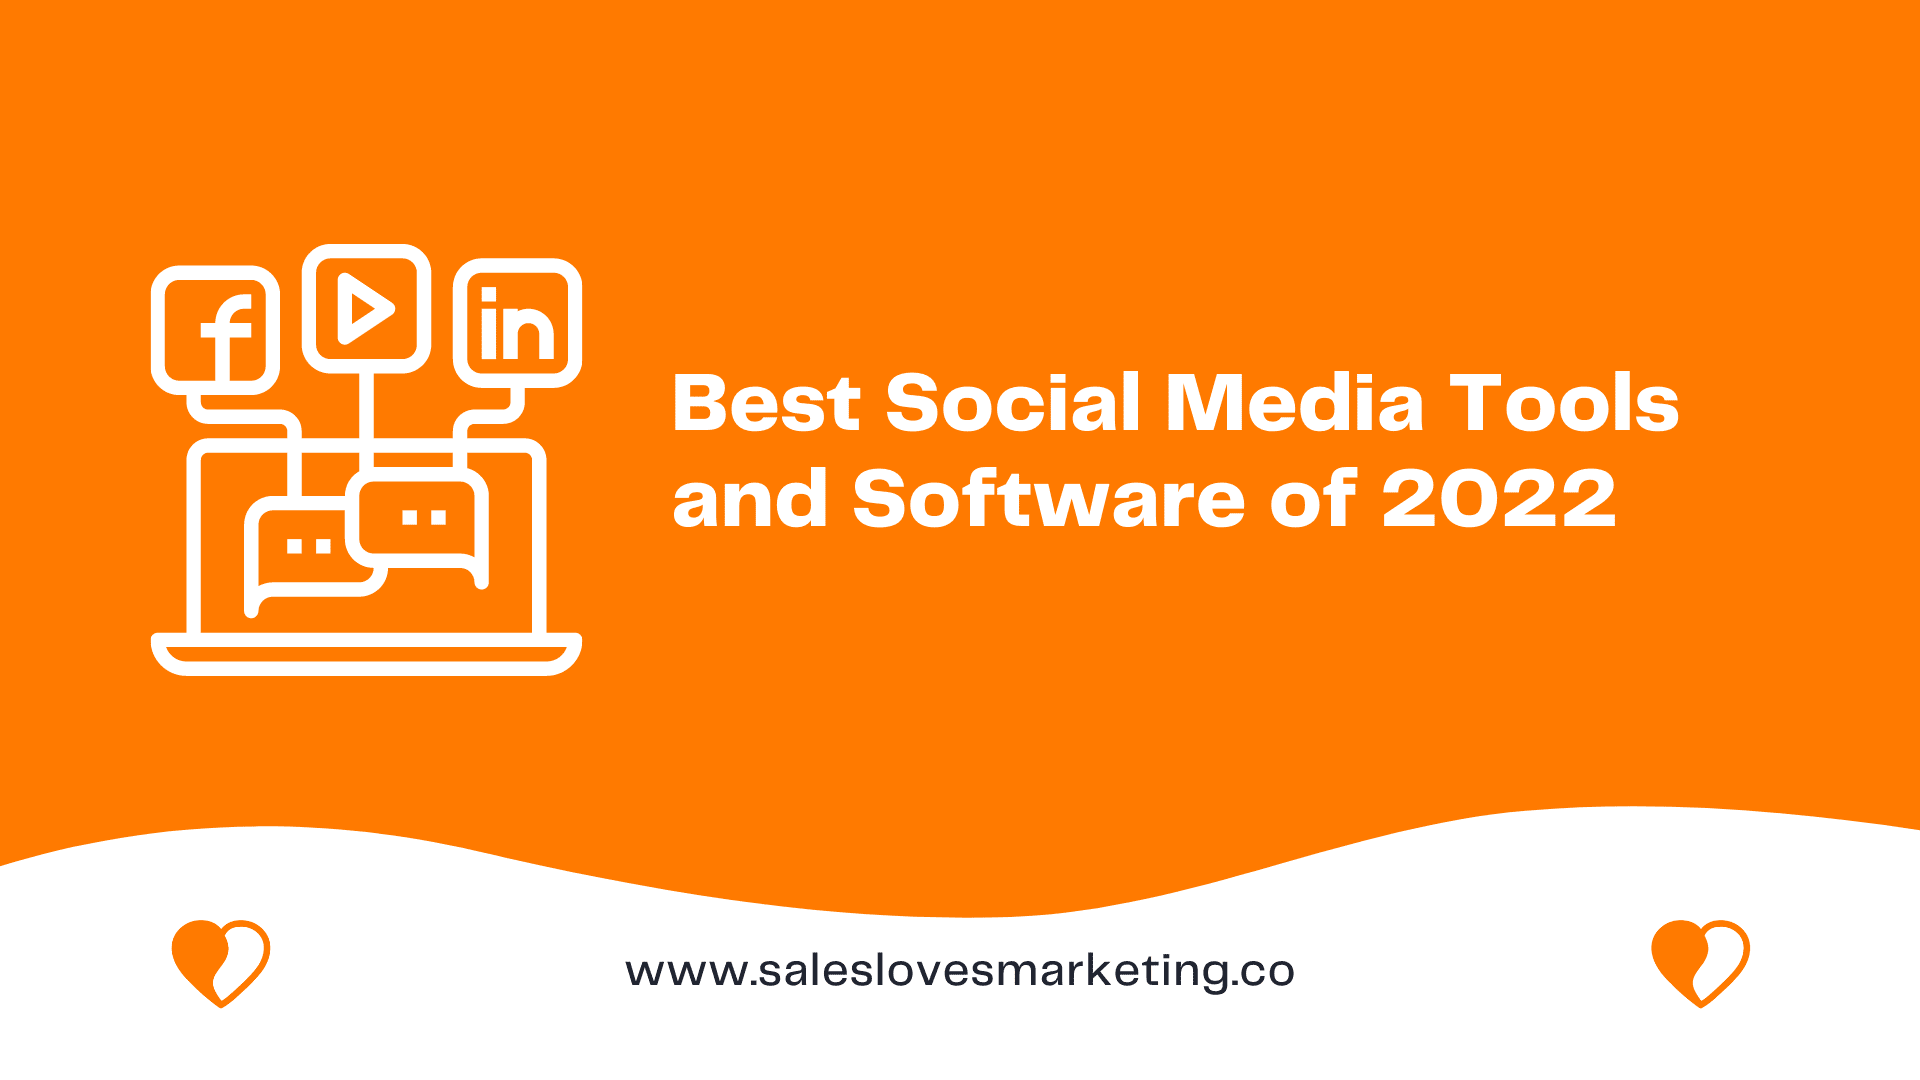 Best Social Media Tools and Software of 2022